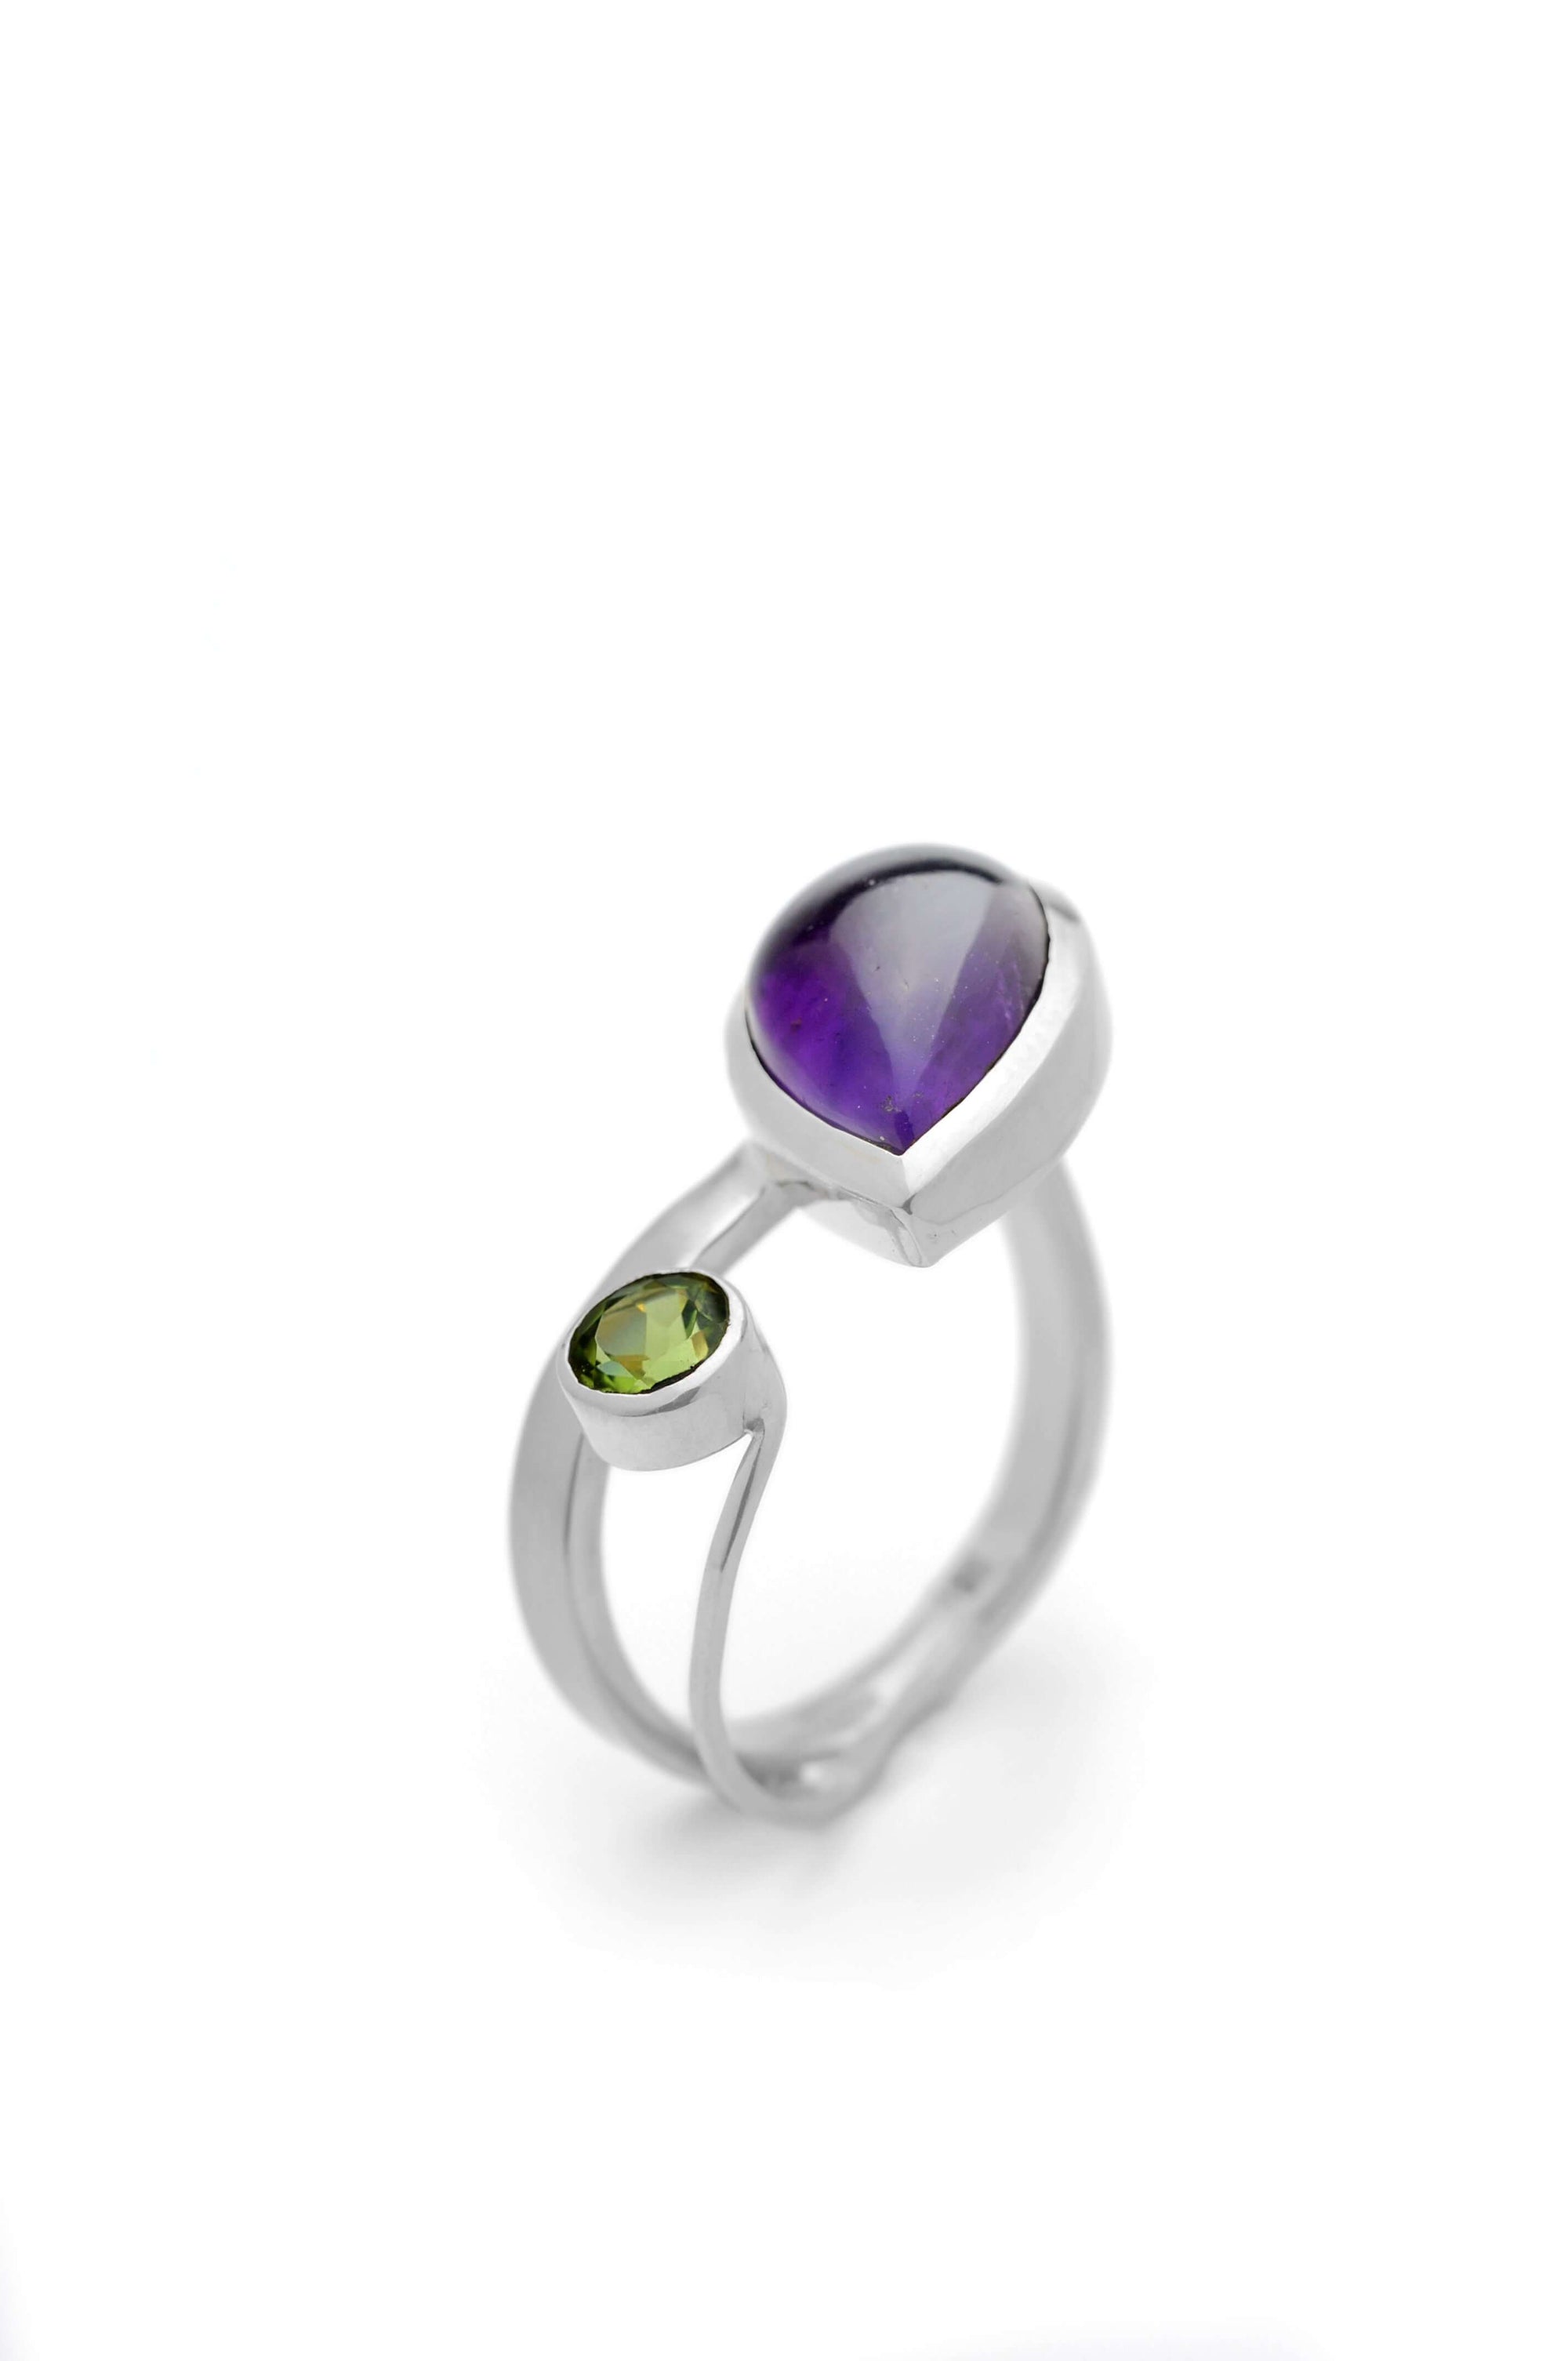 A sterling silver amethyst ring, a gap ring with peridot